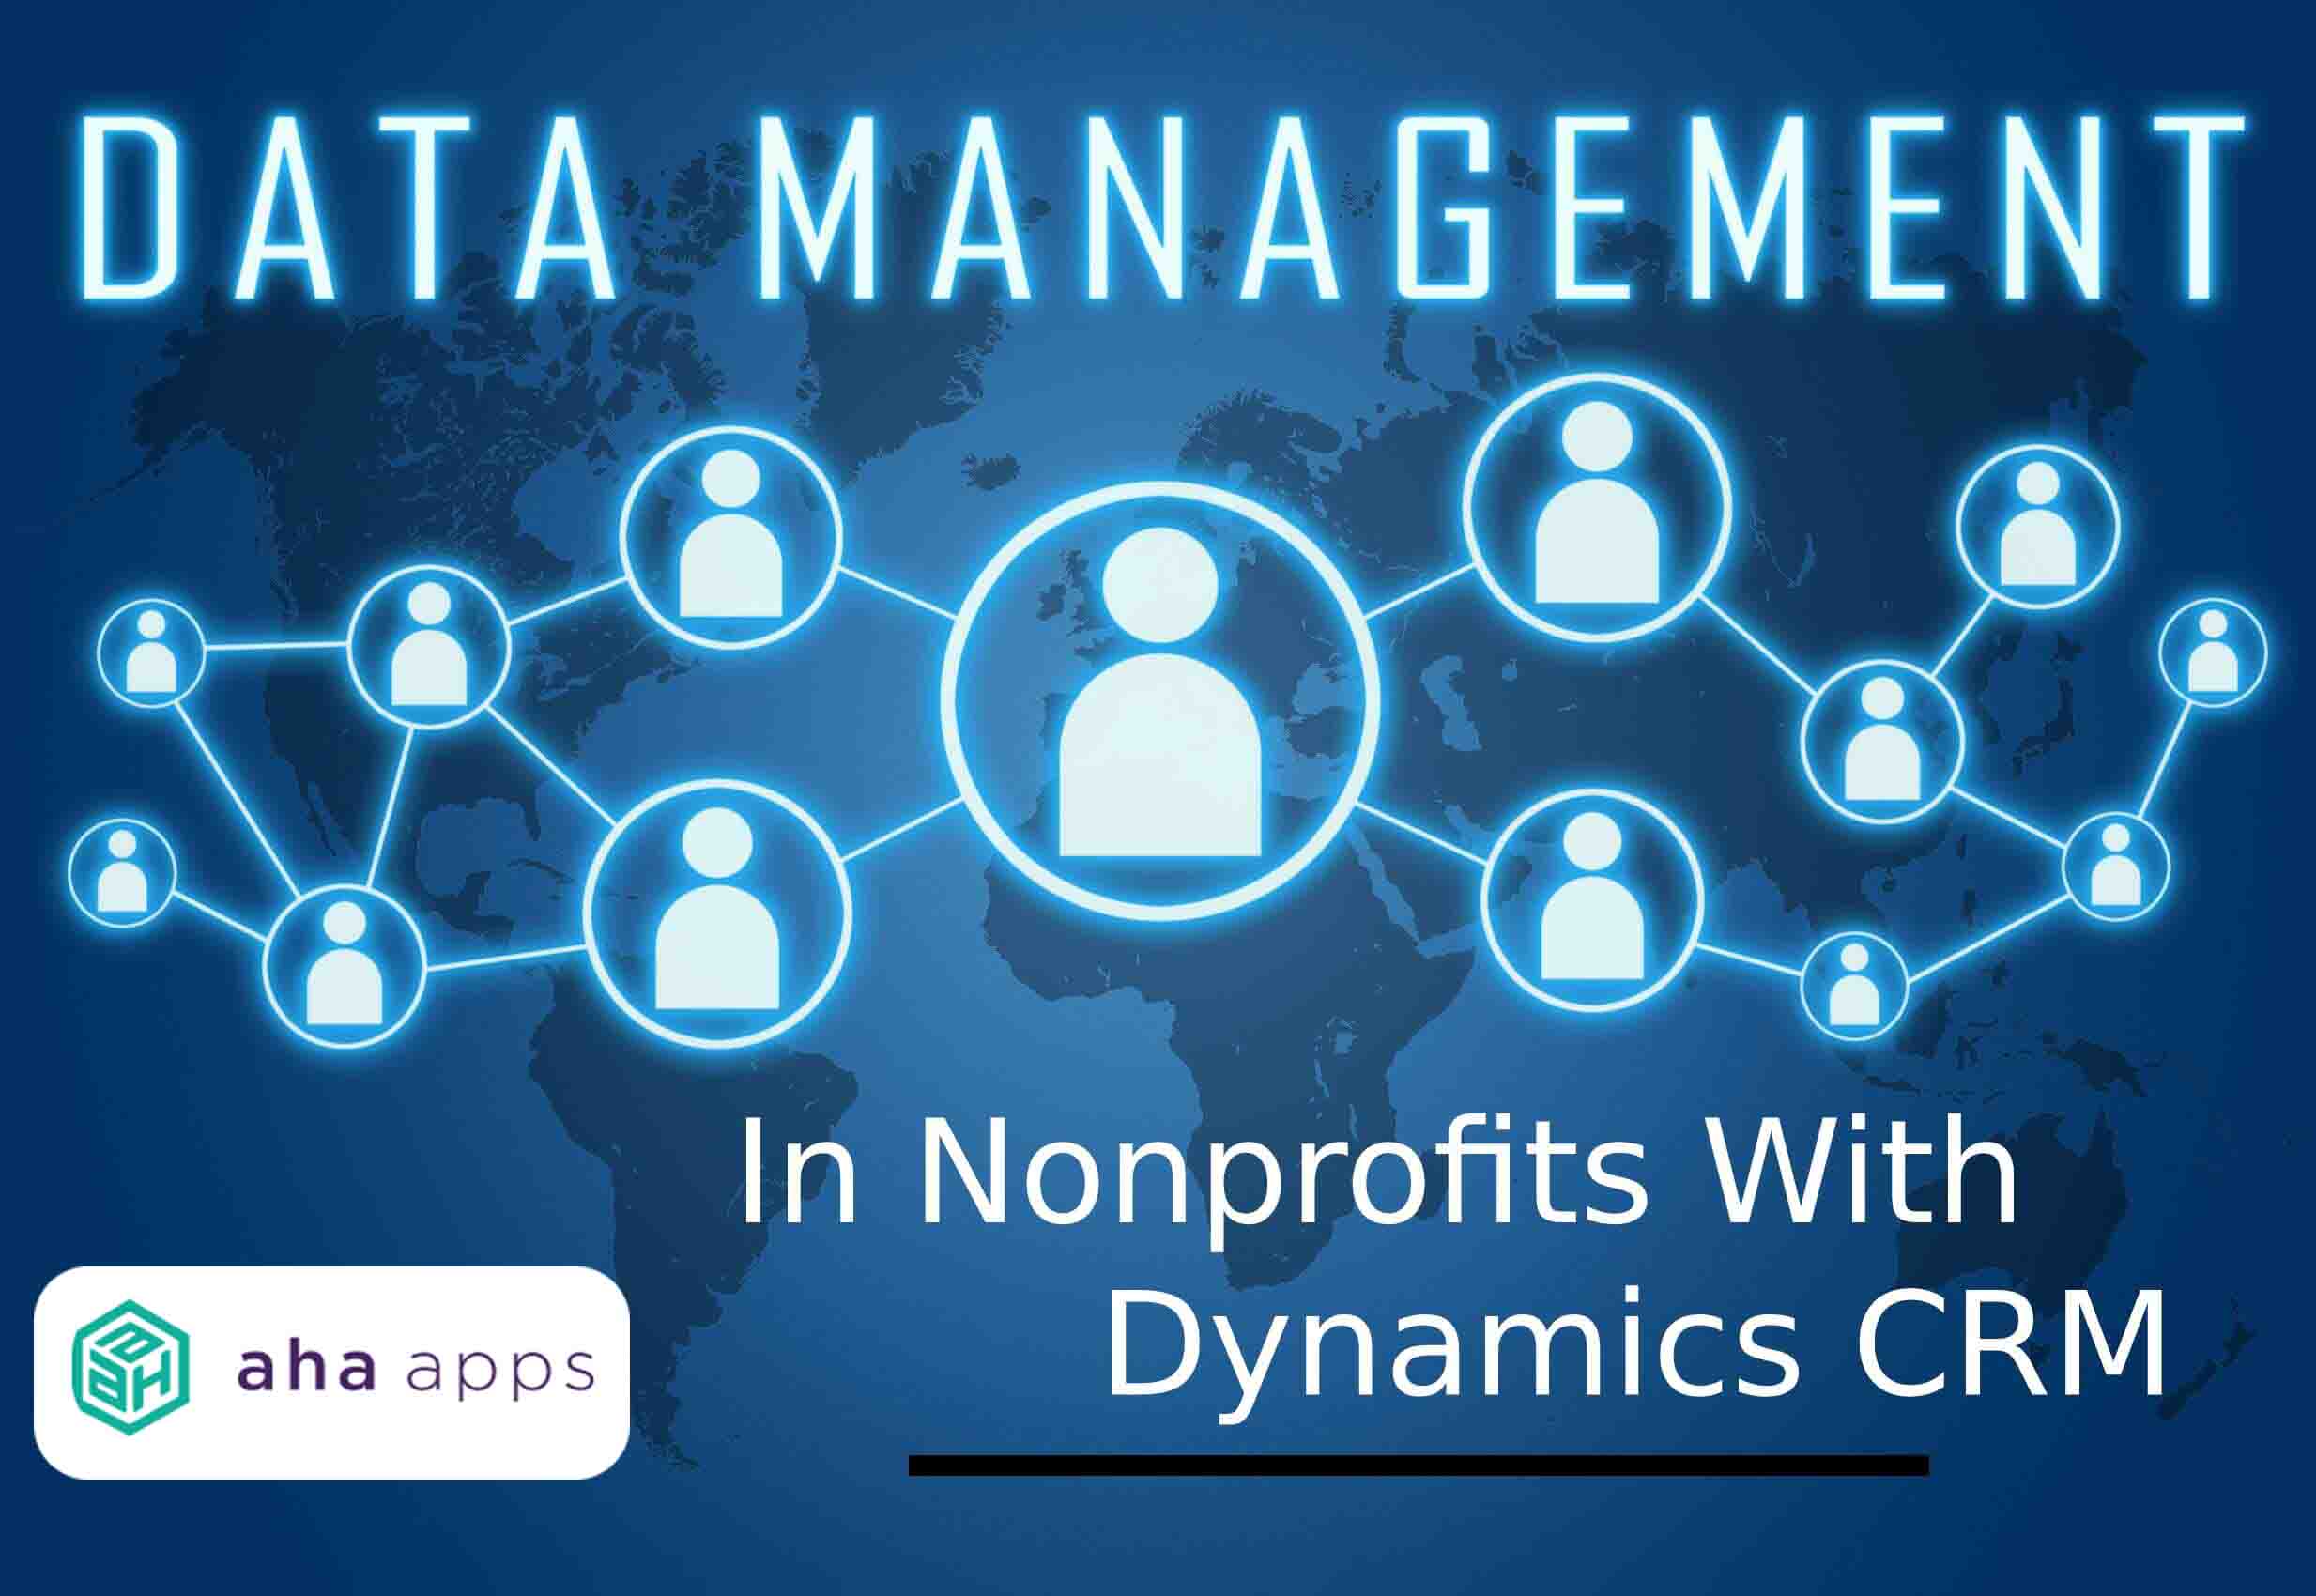 Data Management in Nonprofits with Dynamics CRM - AhaApps